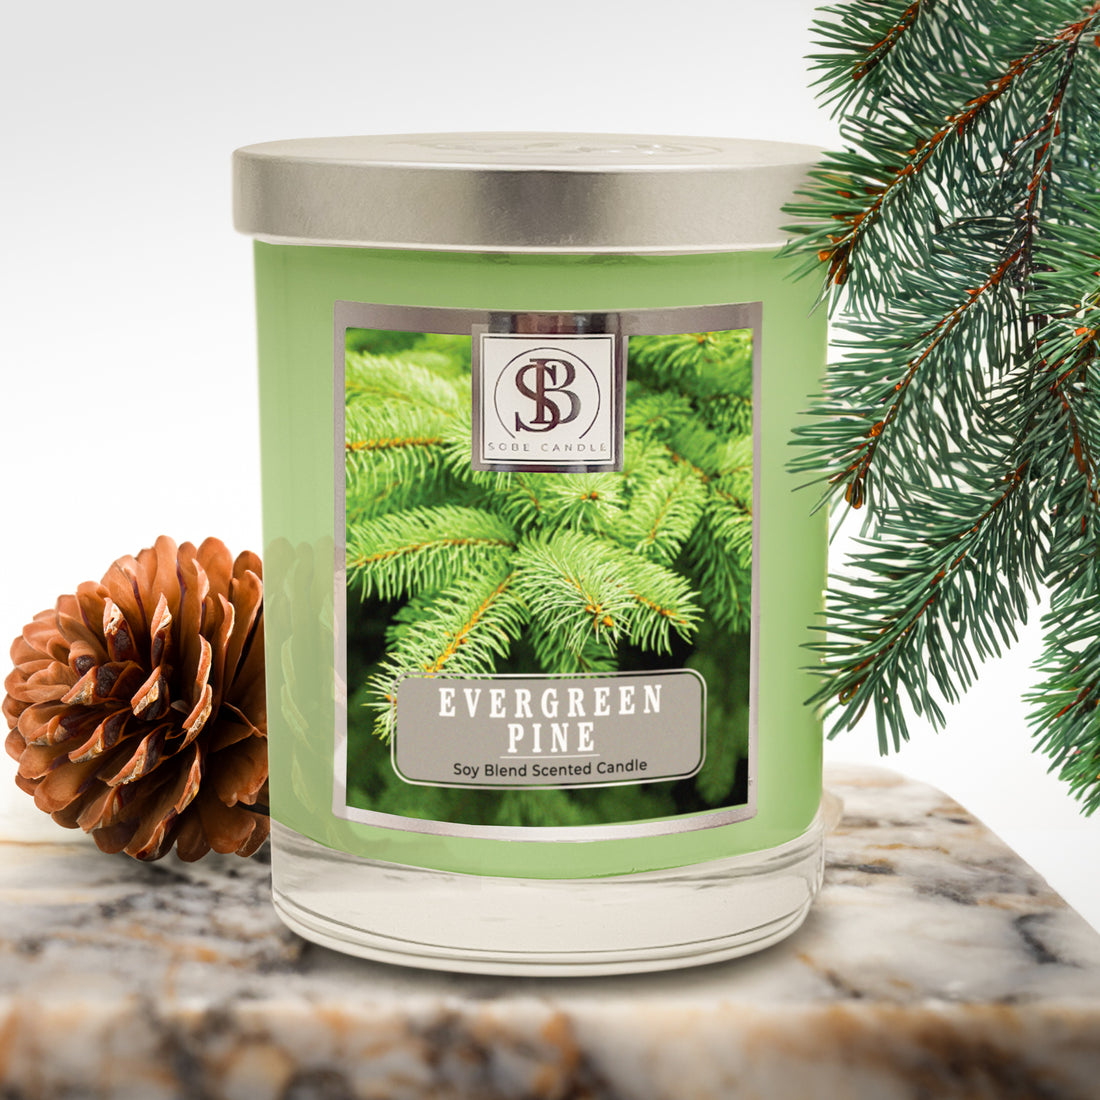 🌲 Introducing the Evergreen Pine Scented Candle by SOBE Candle 🌲